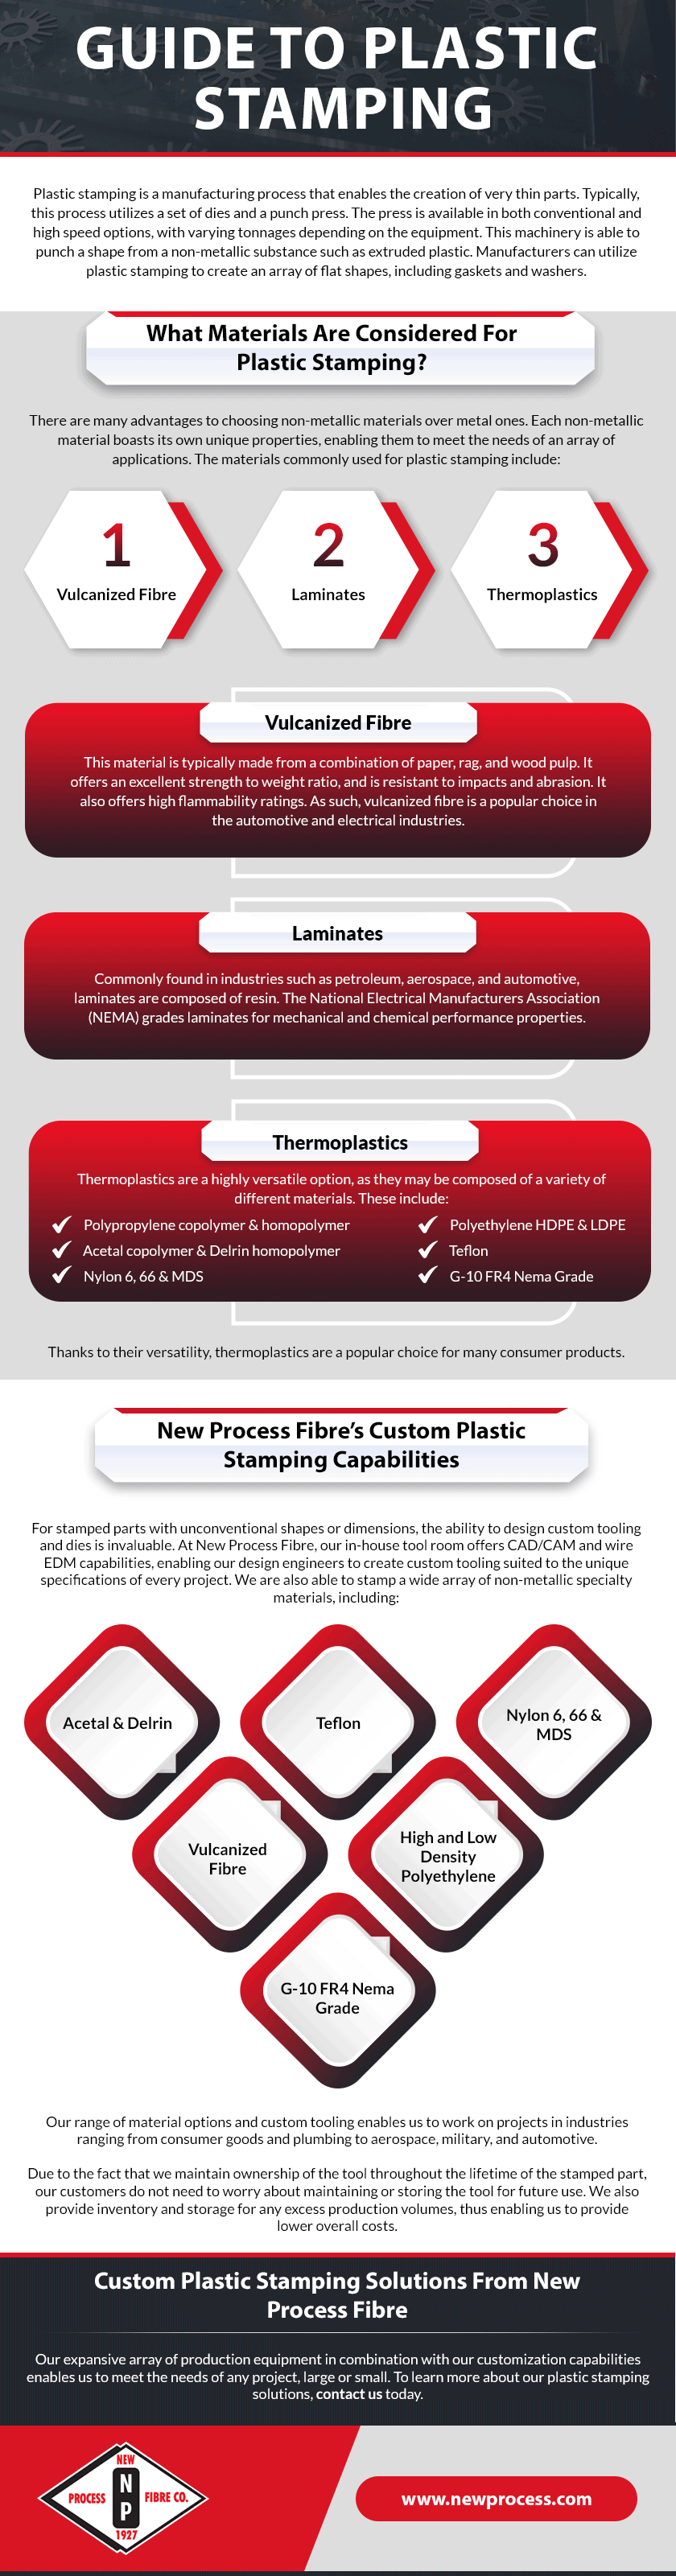 Guide-to-Plastic-Stamping infographic